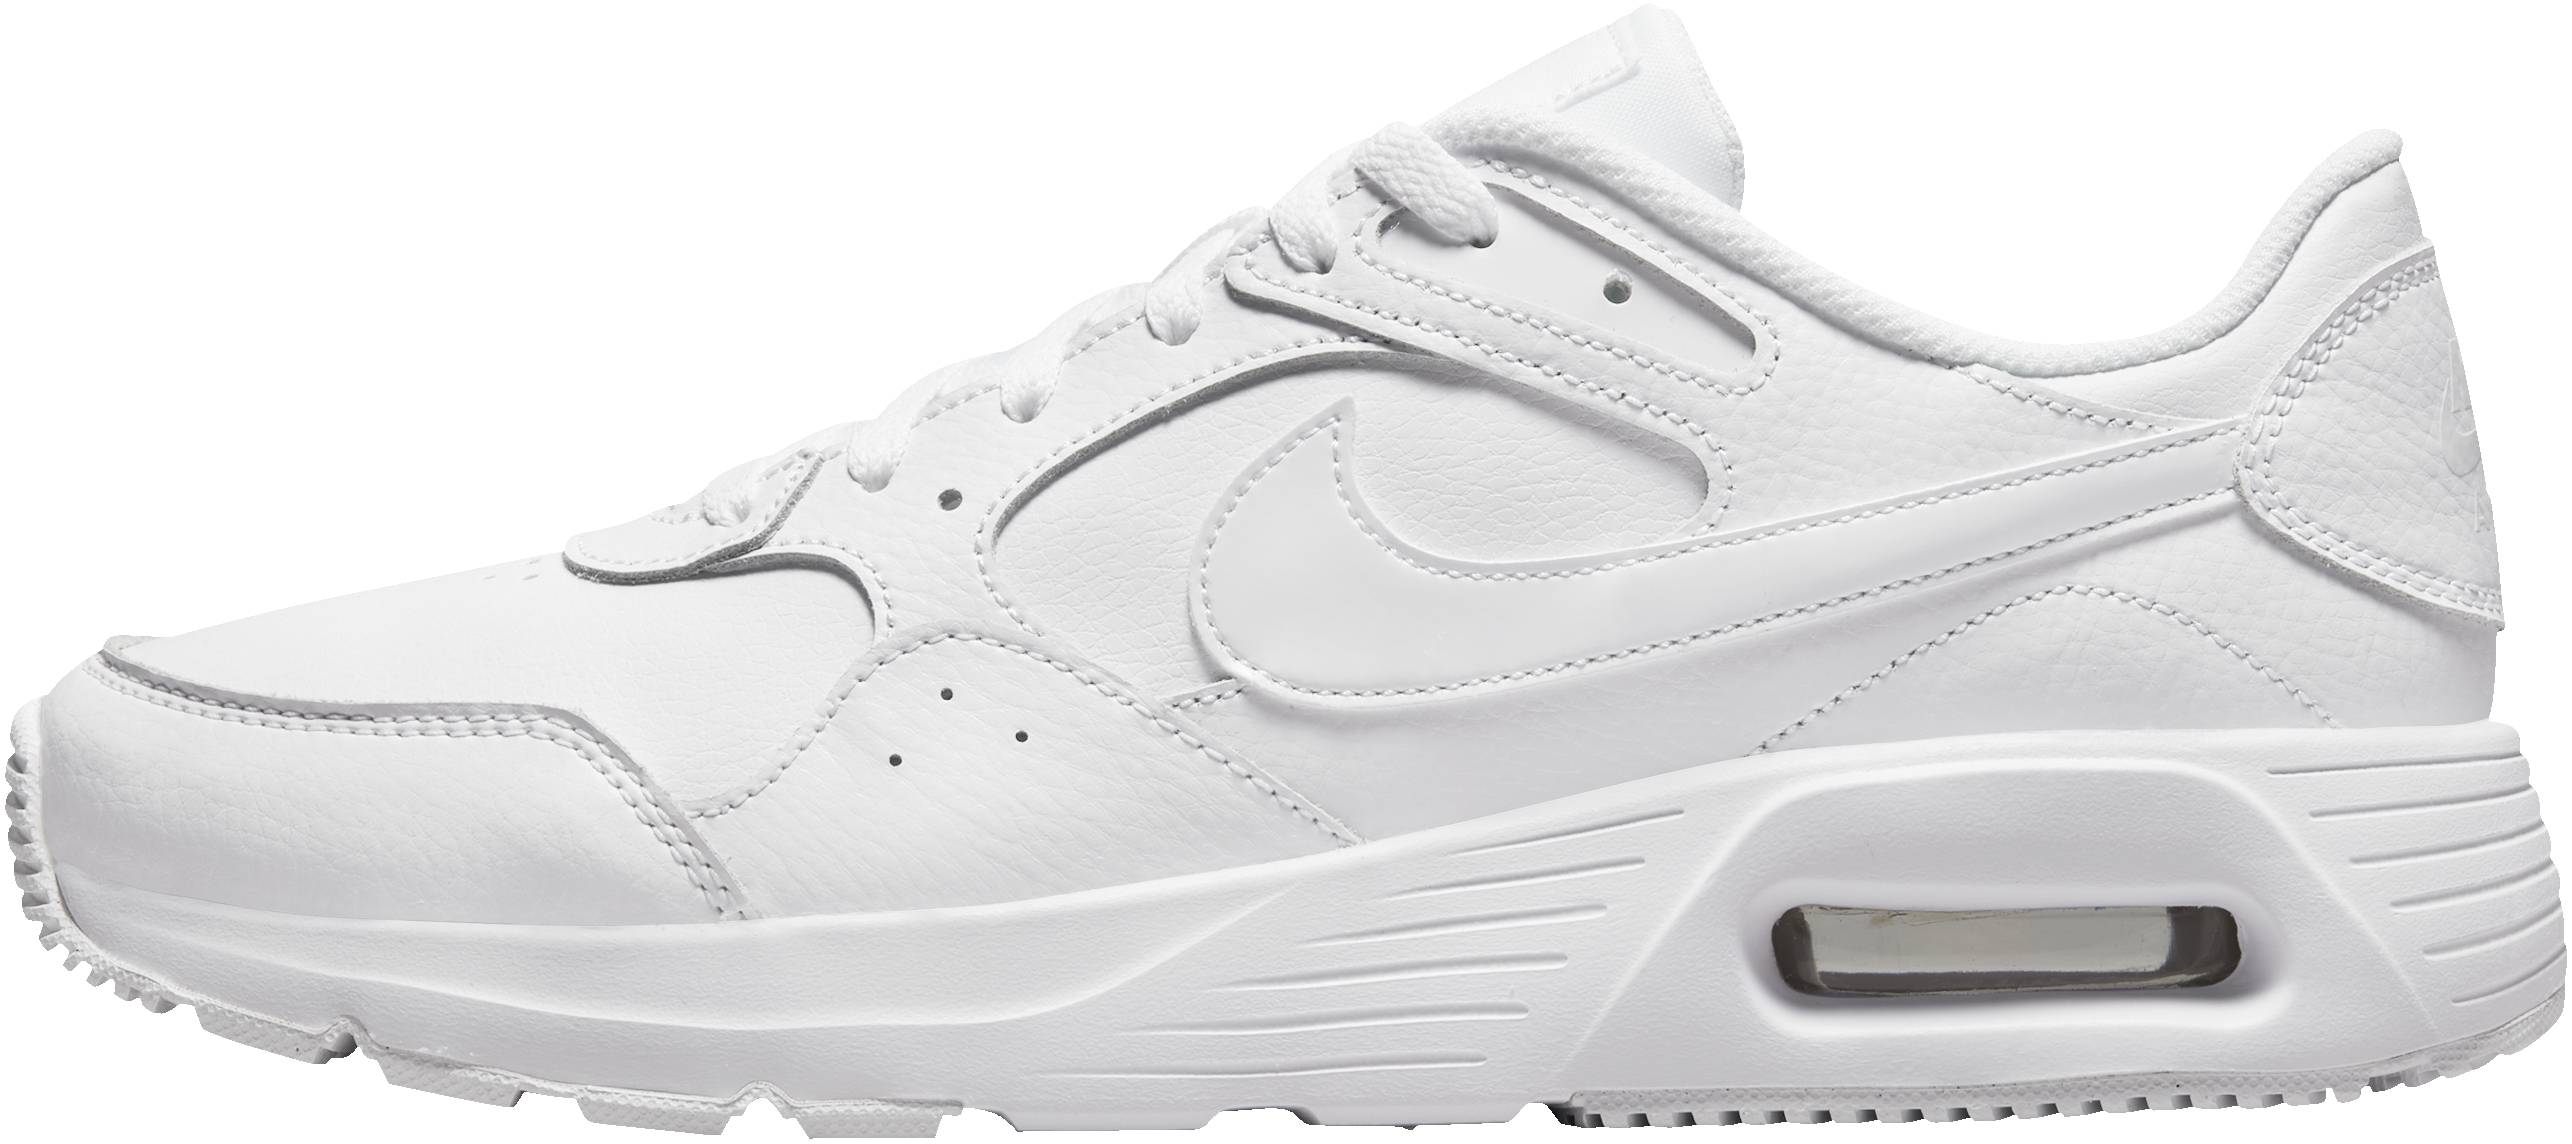 Interpretive Usual abortion Nike Air Max SC Leather sneakers in black + white | RunRepeat